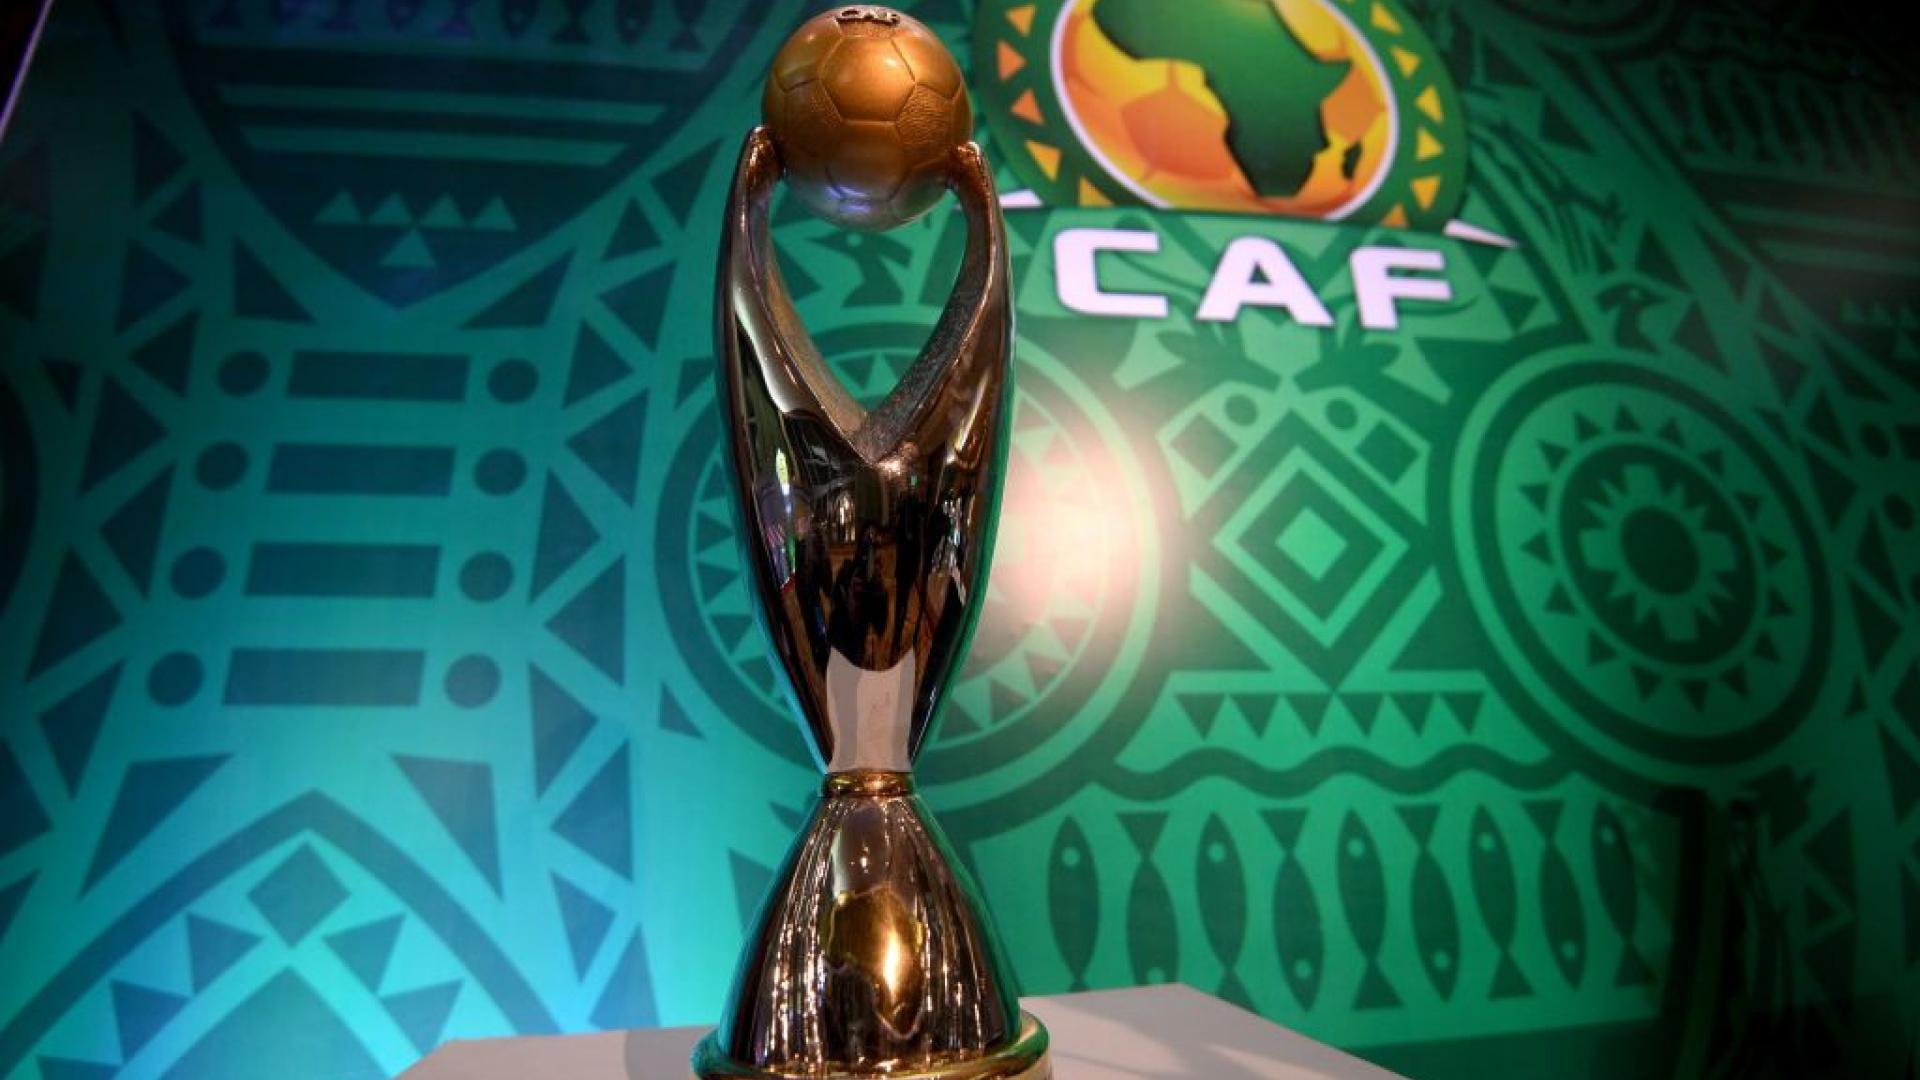 CAF Champions League Wallpapers Wallpaper Cave